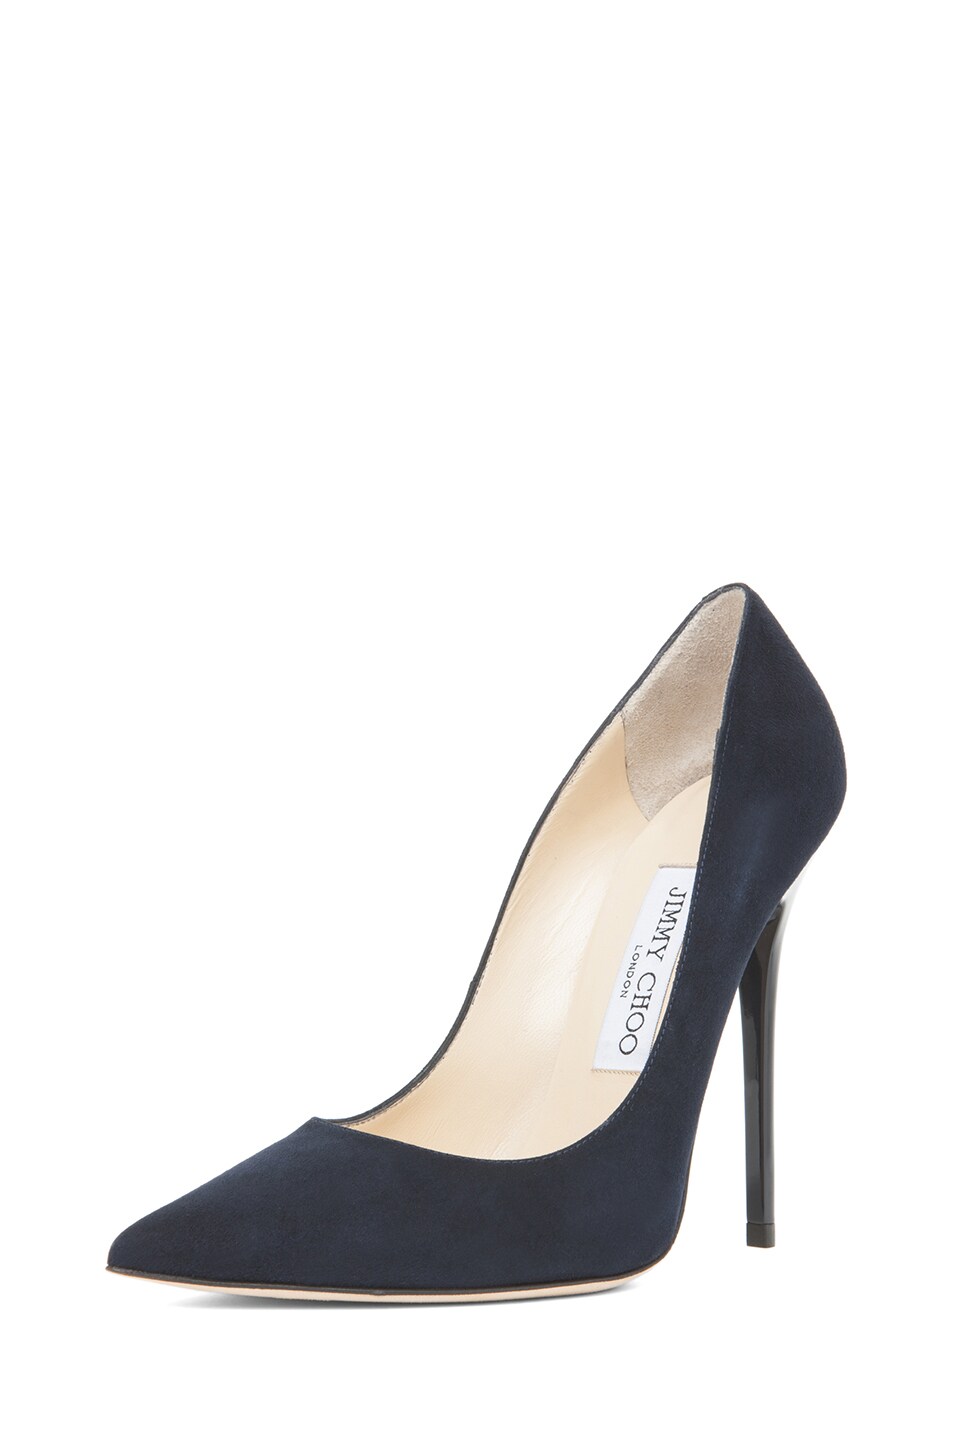 Image 1 of Jimmy Choo Anouk Pump in Navy